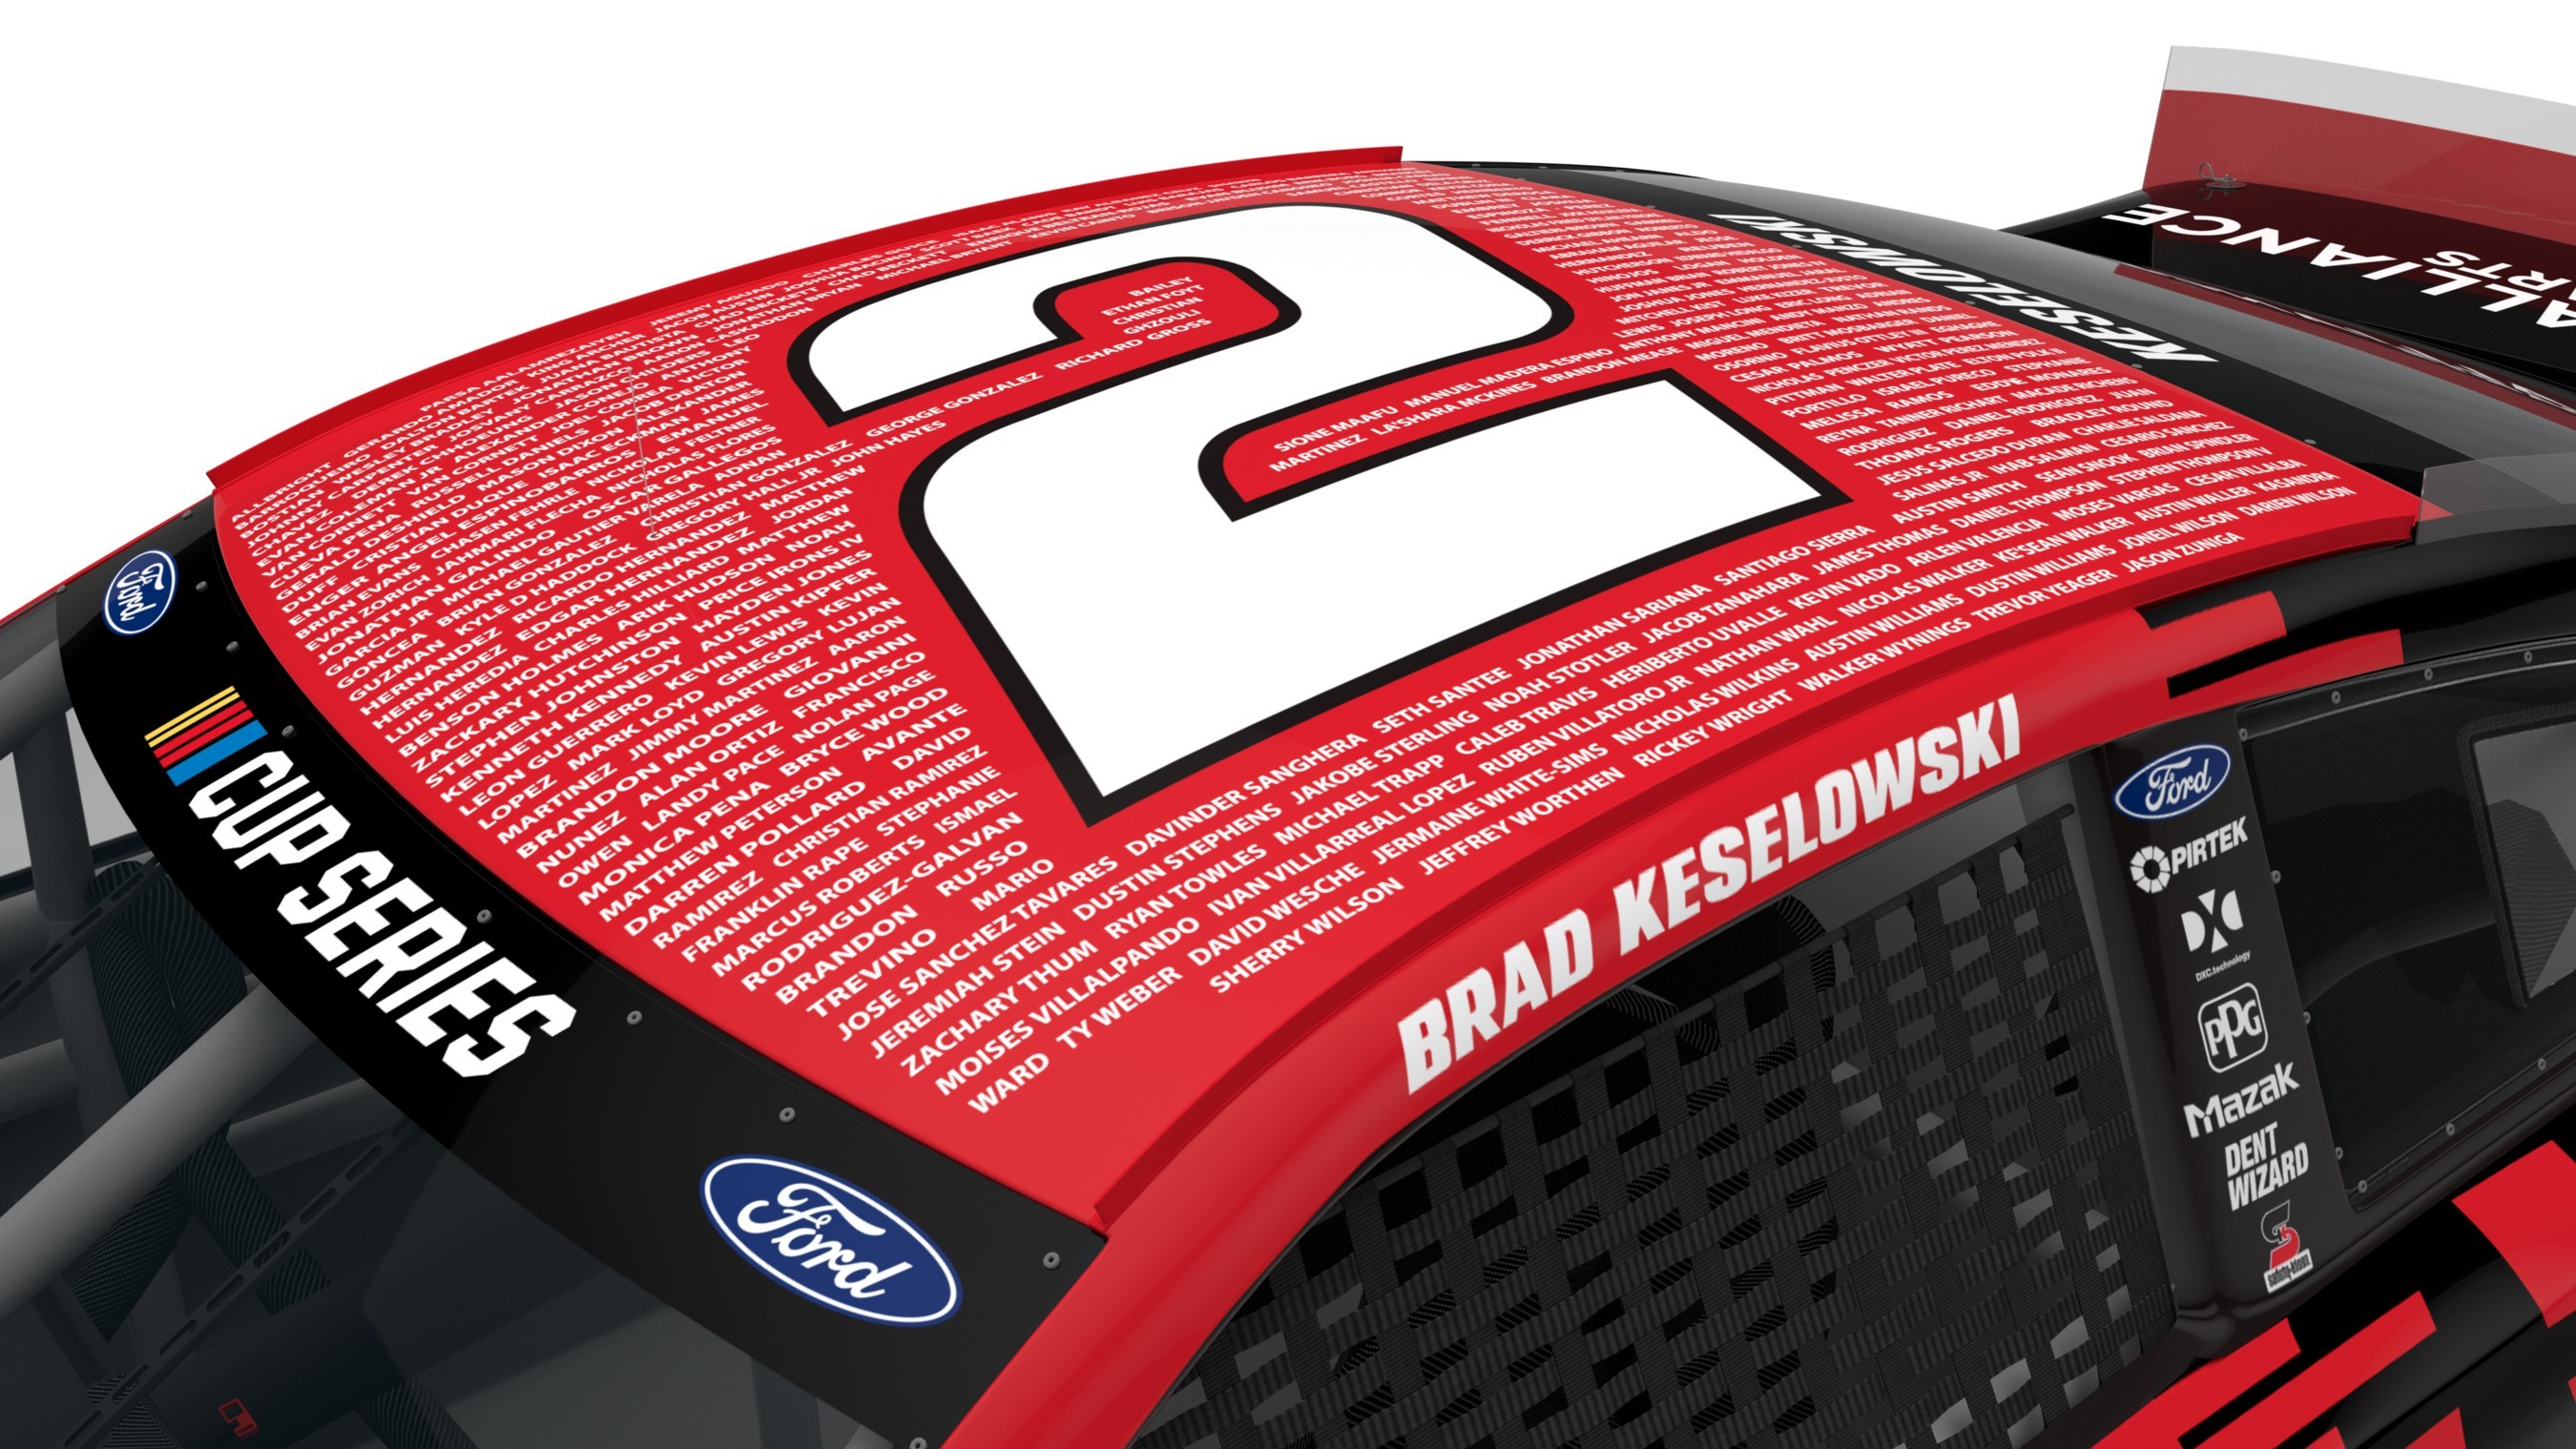 Team Penske's No. 2 Würth Ford Mustang to Recognize Graduate Technicians at  Texas Motor Speedway - Jul 8, 2020